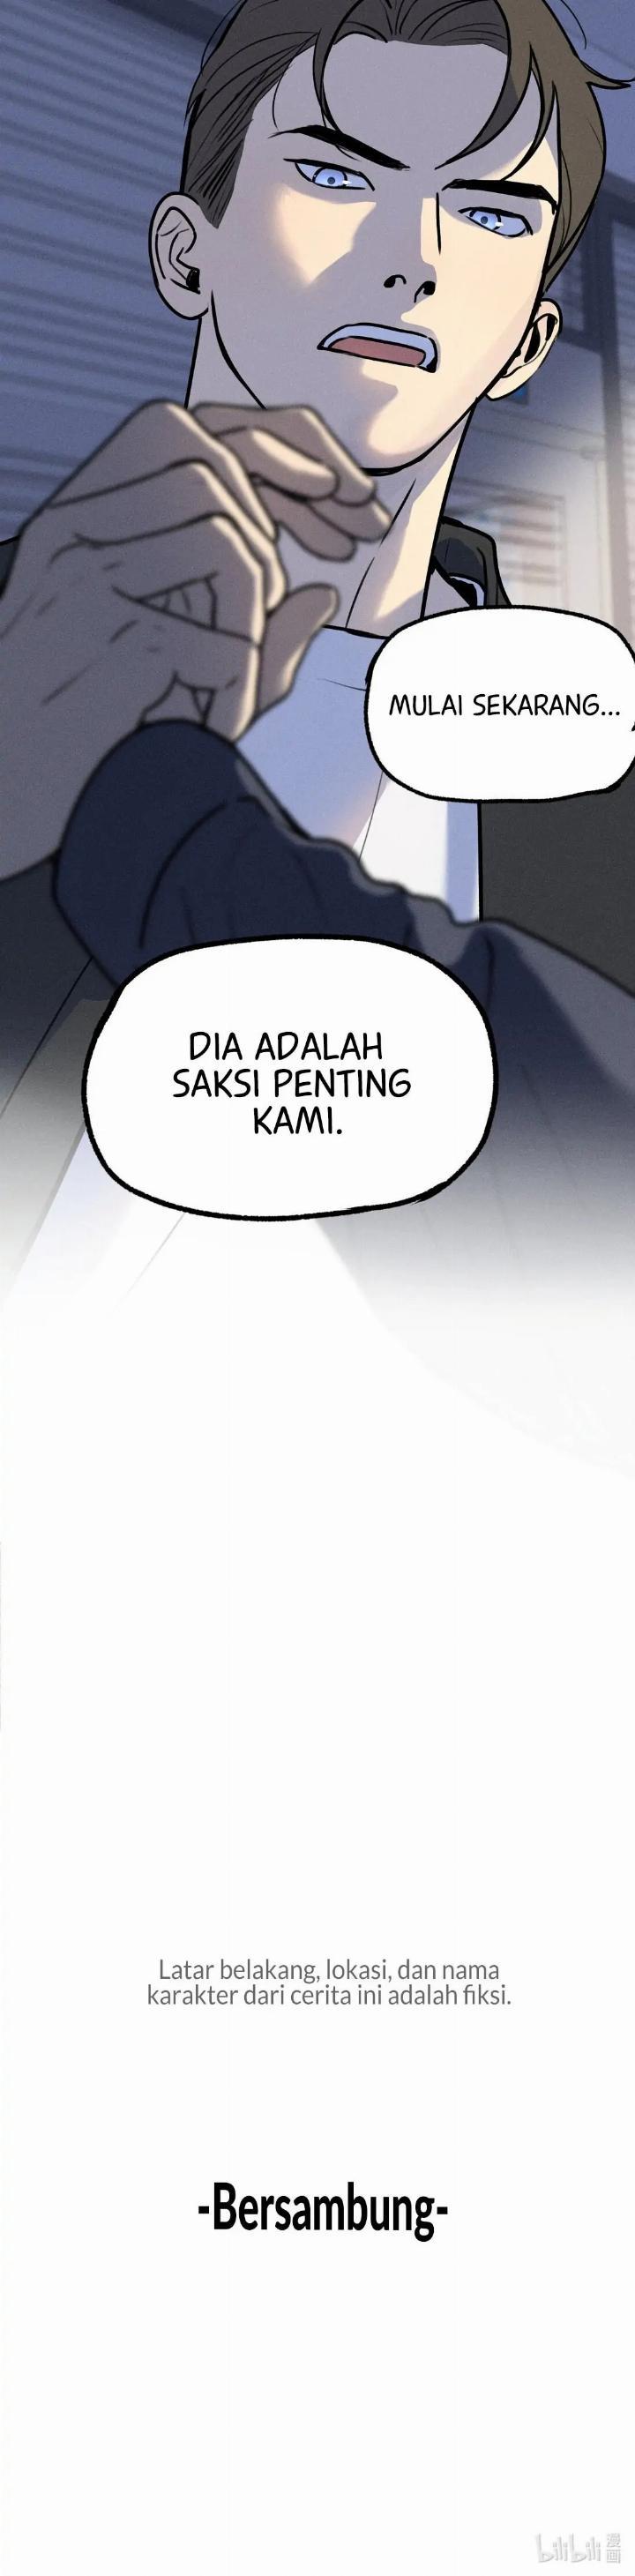 God’s ID Card Chapter 15